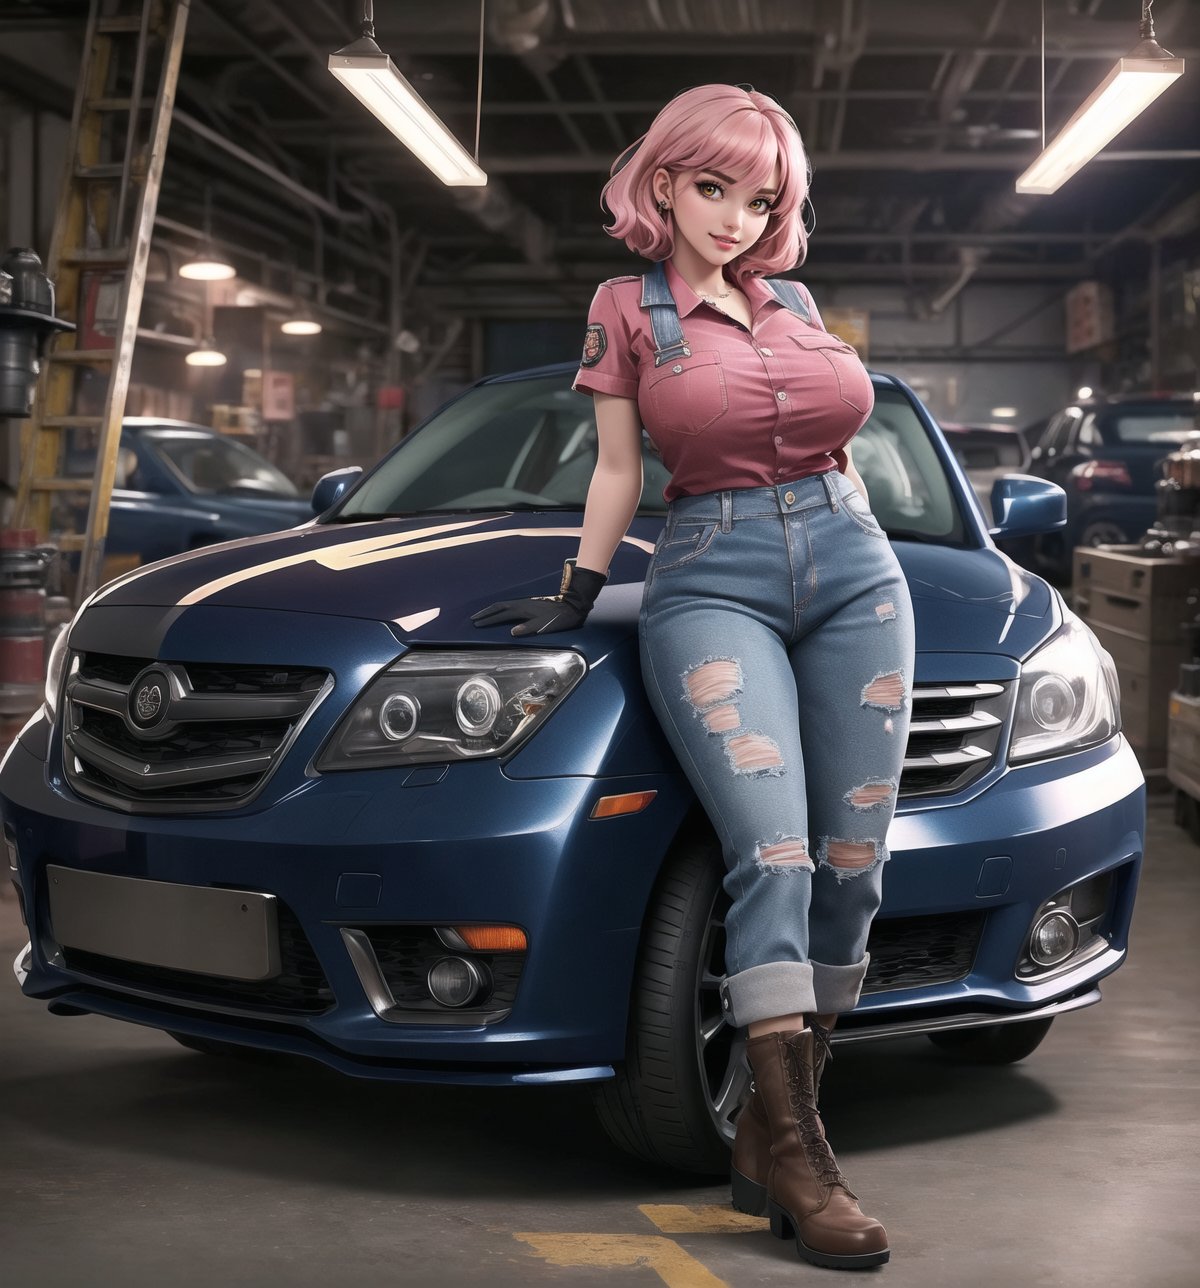 An ultra-detailed 16K masterpiece with a realistic, industrial style, rendered in ultra-high resolution with lifelike detail. | Rina, a 28-year-old woman, is dressed in dark blue mechanic's overalls, with the name "Rina" embroidered on the chest. She also wears ripped jeans, black leather boots, and brown leather gloves. Her short pink hair is tousled in a modern, shaggy cut. Her golden eyes are looking straight at the viewer as she smiles and shows her teeth, wearing bright red lipstick and war paint on her face. It is located in a car repair shop, with machines, tires, metal structures and car engines all around. The light from fluorescent lamps illuminates the place, creating an atmosphere of hard, concentrated work. | The image highlights Rina's sensual figure and the industrial elements of the car repair shop. Machines, tires, metal structures and car engines create a hard, focused work environment. Fluorescent lamps illuminate the scene, creating dramatic shadows and highlighting the details of the scene. | Soft, colorful lighting effects create a realistic, industrial atmosphere, while rough, detailed textures on the metal structures and costume add realism to the image. | A sensual and realistic scene of a woman in a car repair shop, fusing elements of realistic and industrial art. | (((The image reveals a full-body shot as Rina assumes a sensual pose, engagingly leaning against a structure within the scene in an exciting manner. She takes on a sensual pose as she interacts, boldly leaning on a structure, leaning back and boldly throwing herself onto the structure, reclining back in an exhilarating way.))). | ((((full-body shot)))), ((perfect pose)), ((perfect limbs, perfect fingers, better hands, perfect hands, hands))++, ((perfect legs, perfect feet))++, ((huge breasts)), ((perfect design)), ((perfect composition)), ((very detailed scene, very detailed background, perfect layout, correct imperfections)), Enhance++, Ultra details++, More Detail++